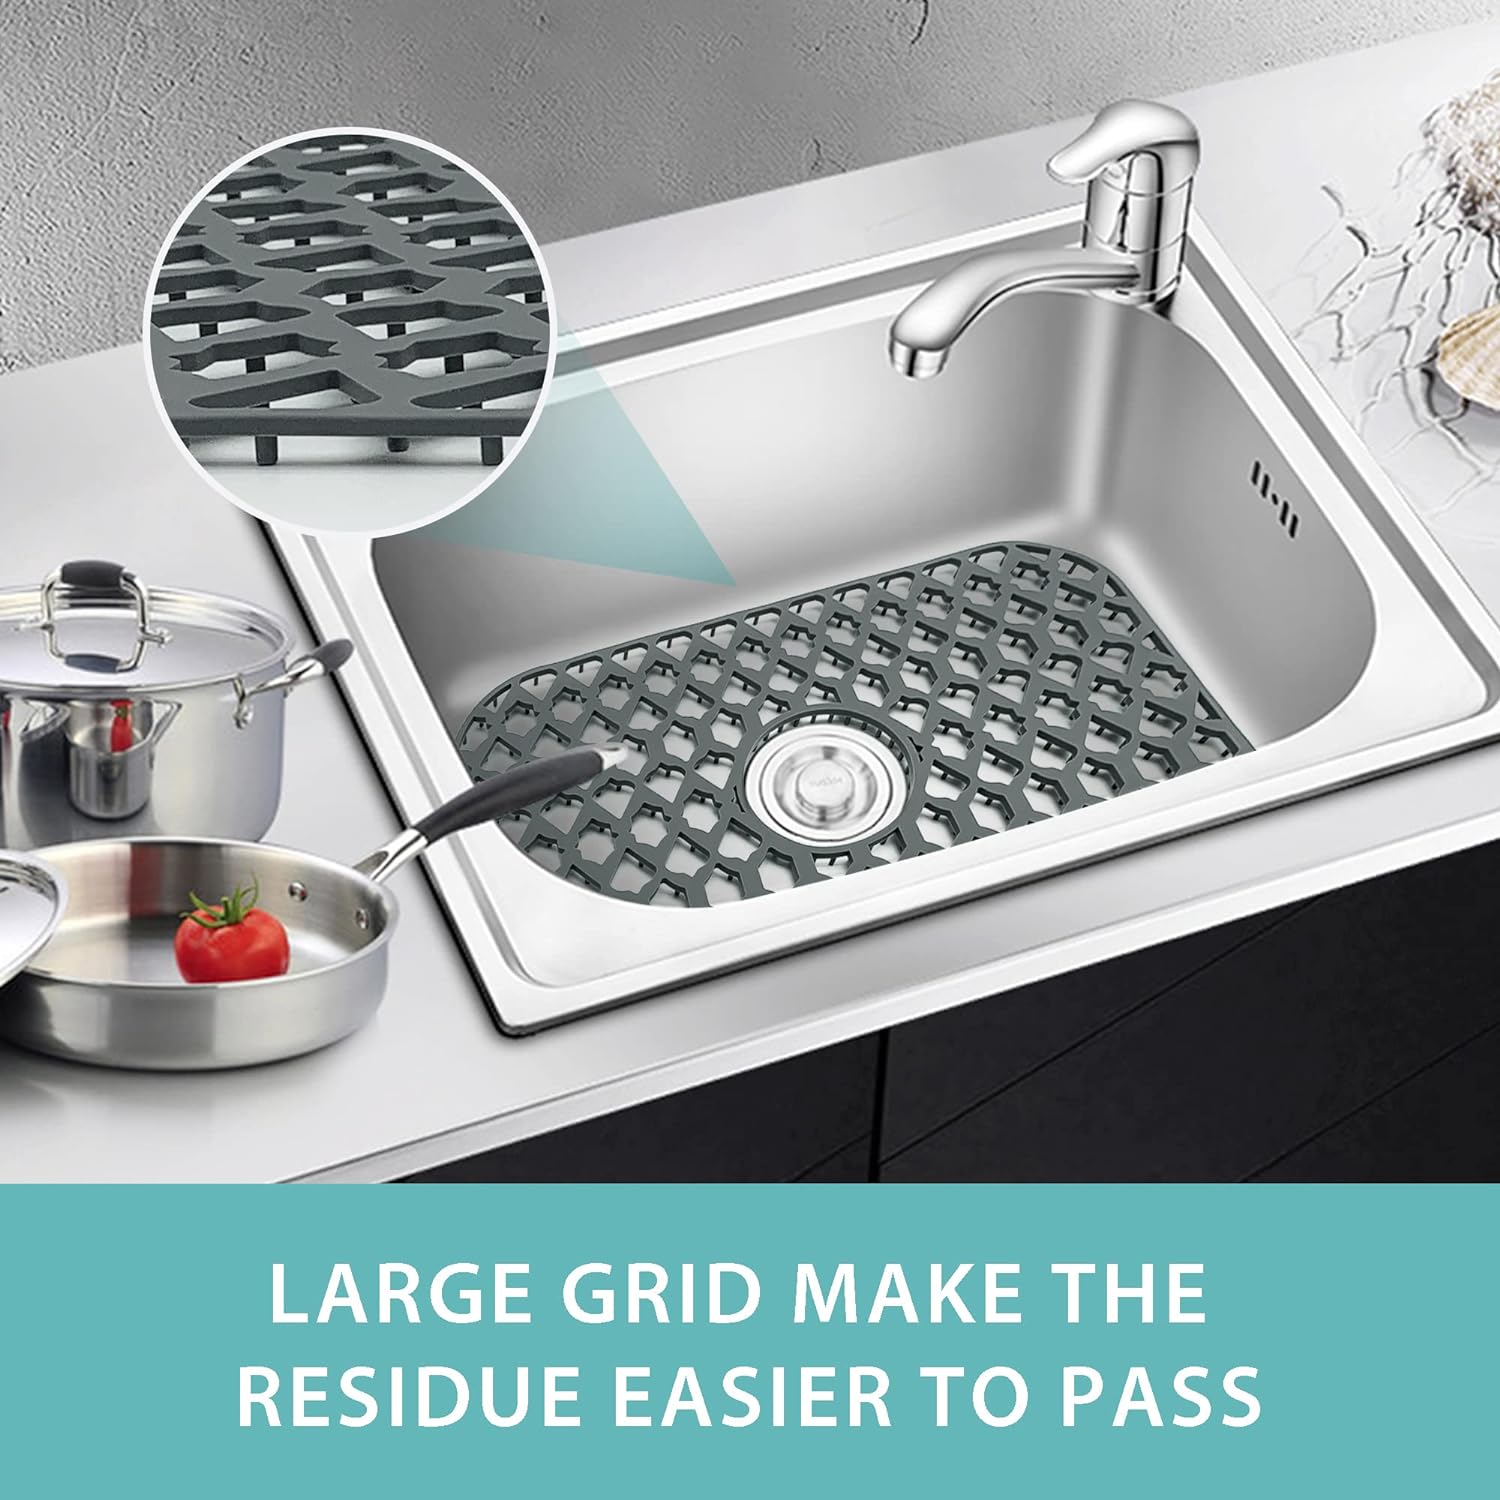 SAMSIER Large Sink Protectors for Kitchen Sink, Silicone Sink Mats Grid for Bottom of Farmhouse Stainless Steel Porcelain Sink (19&